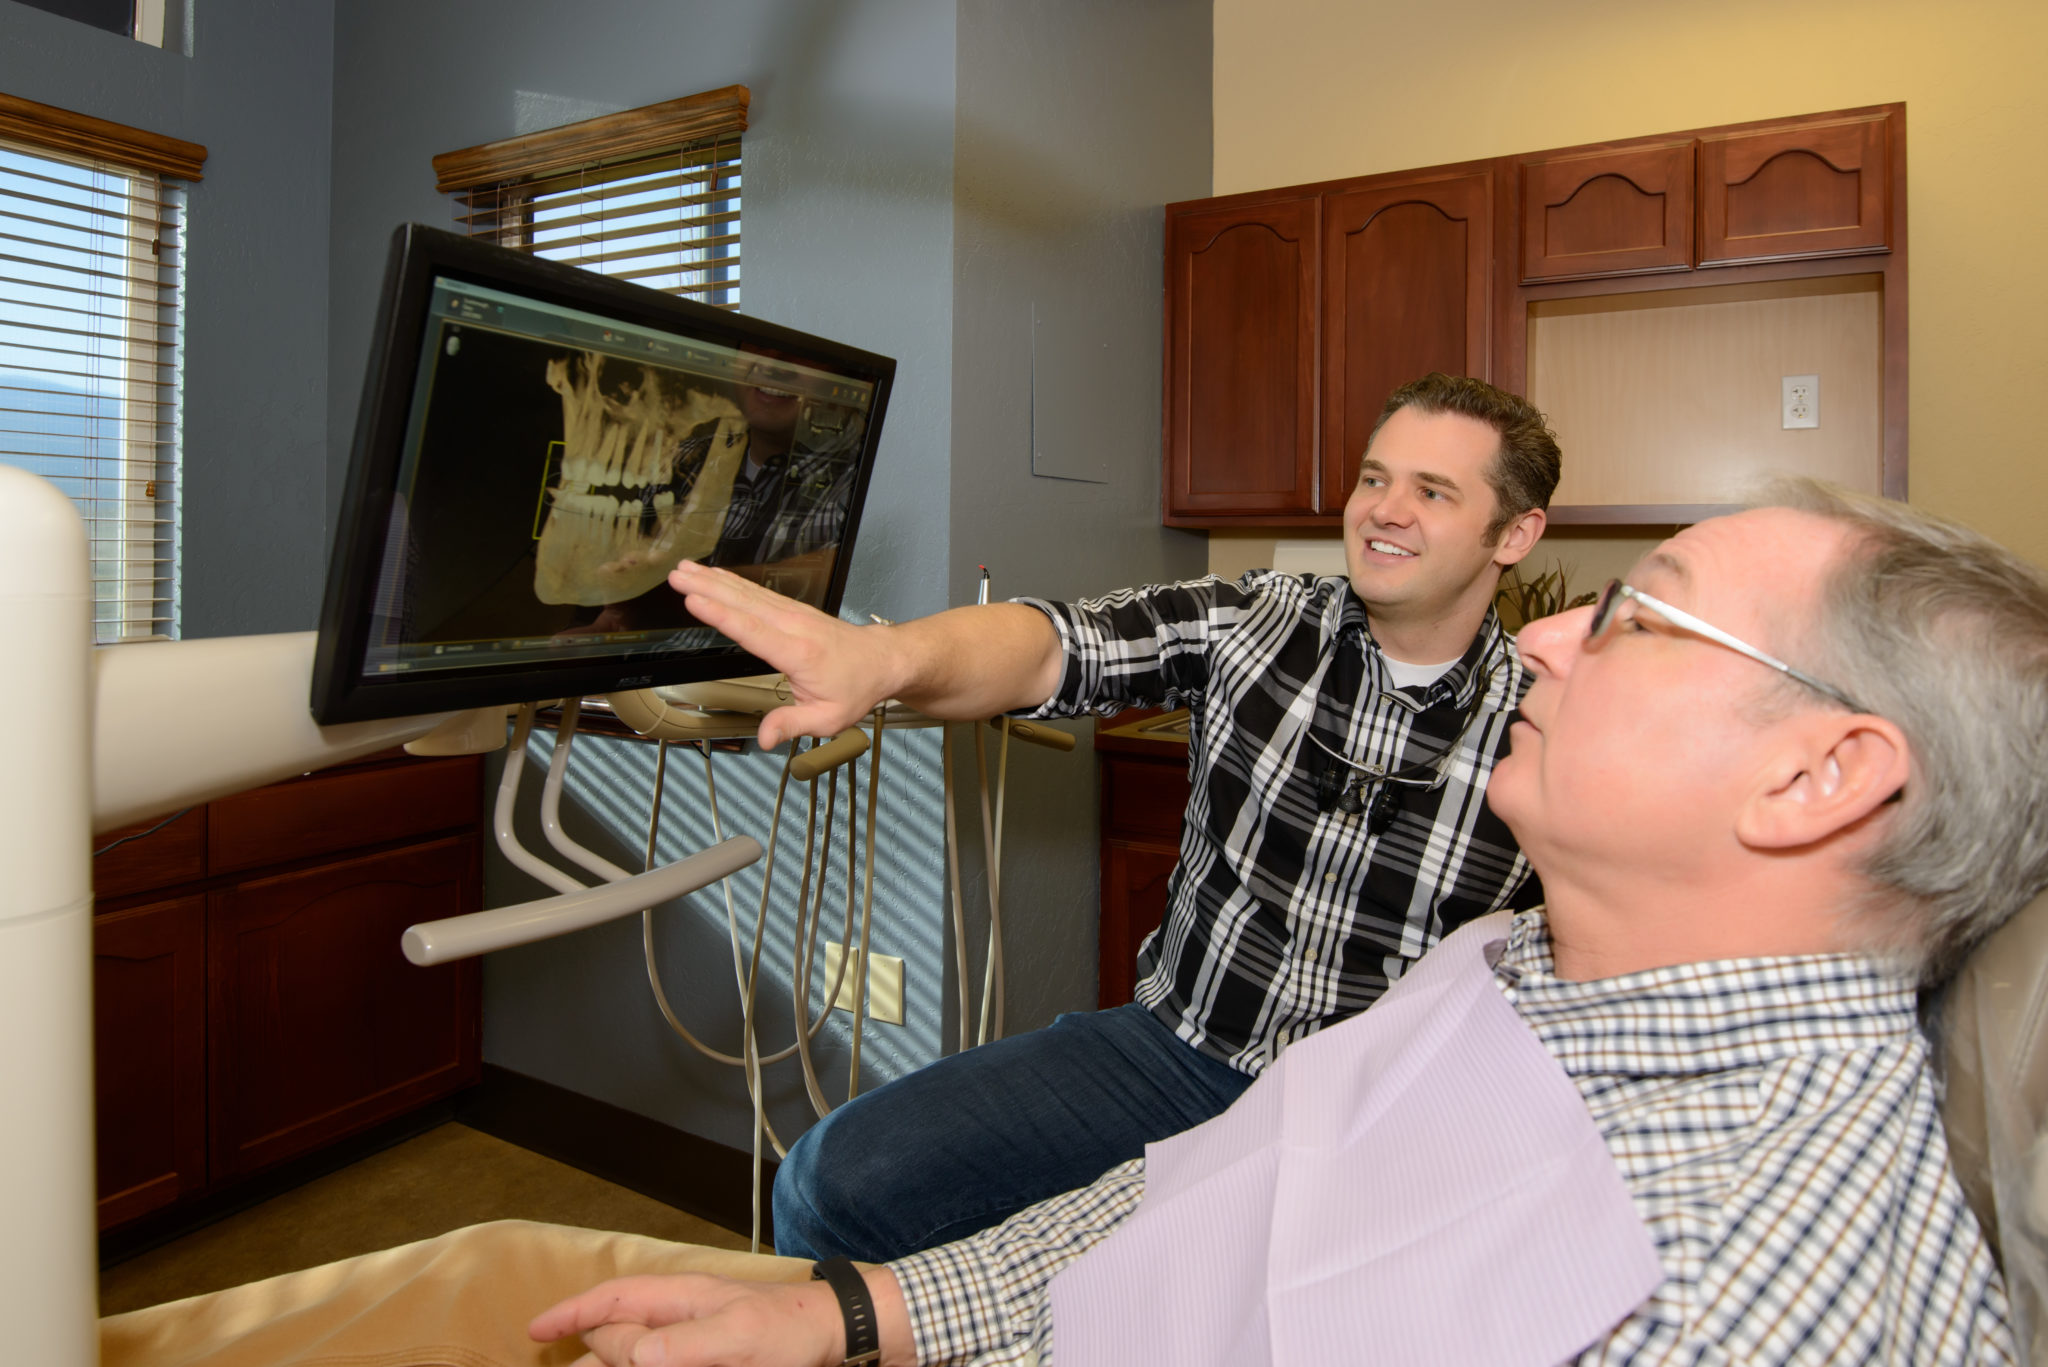 consult with a patient who was looking for an emergency dentist appointment and was seen same-day at Woodland Family Dental. 